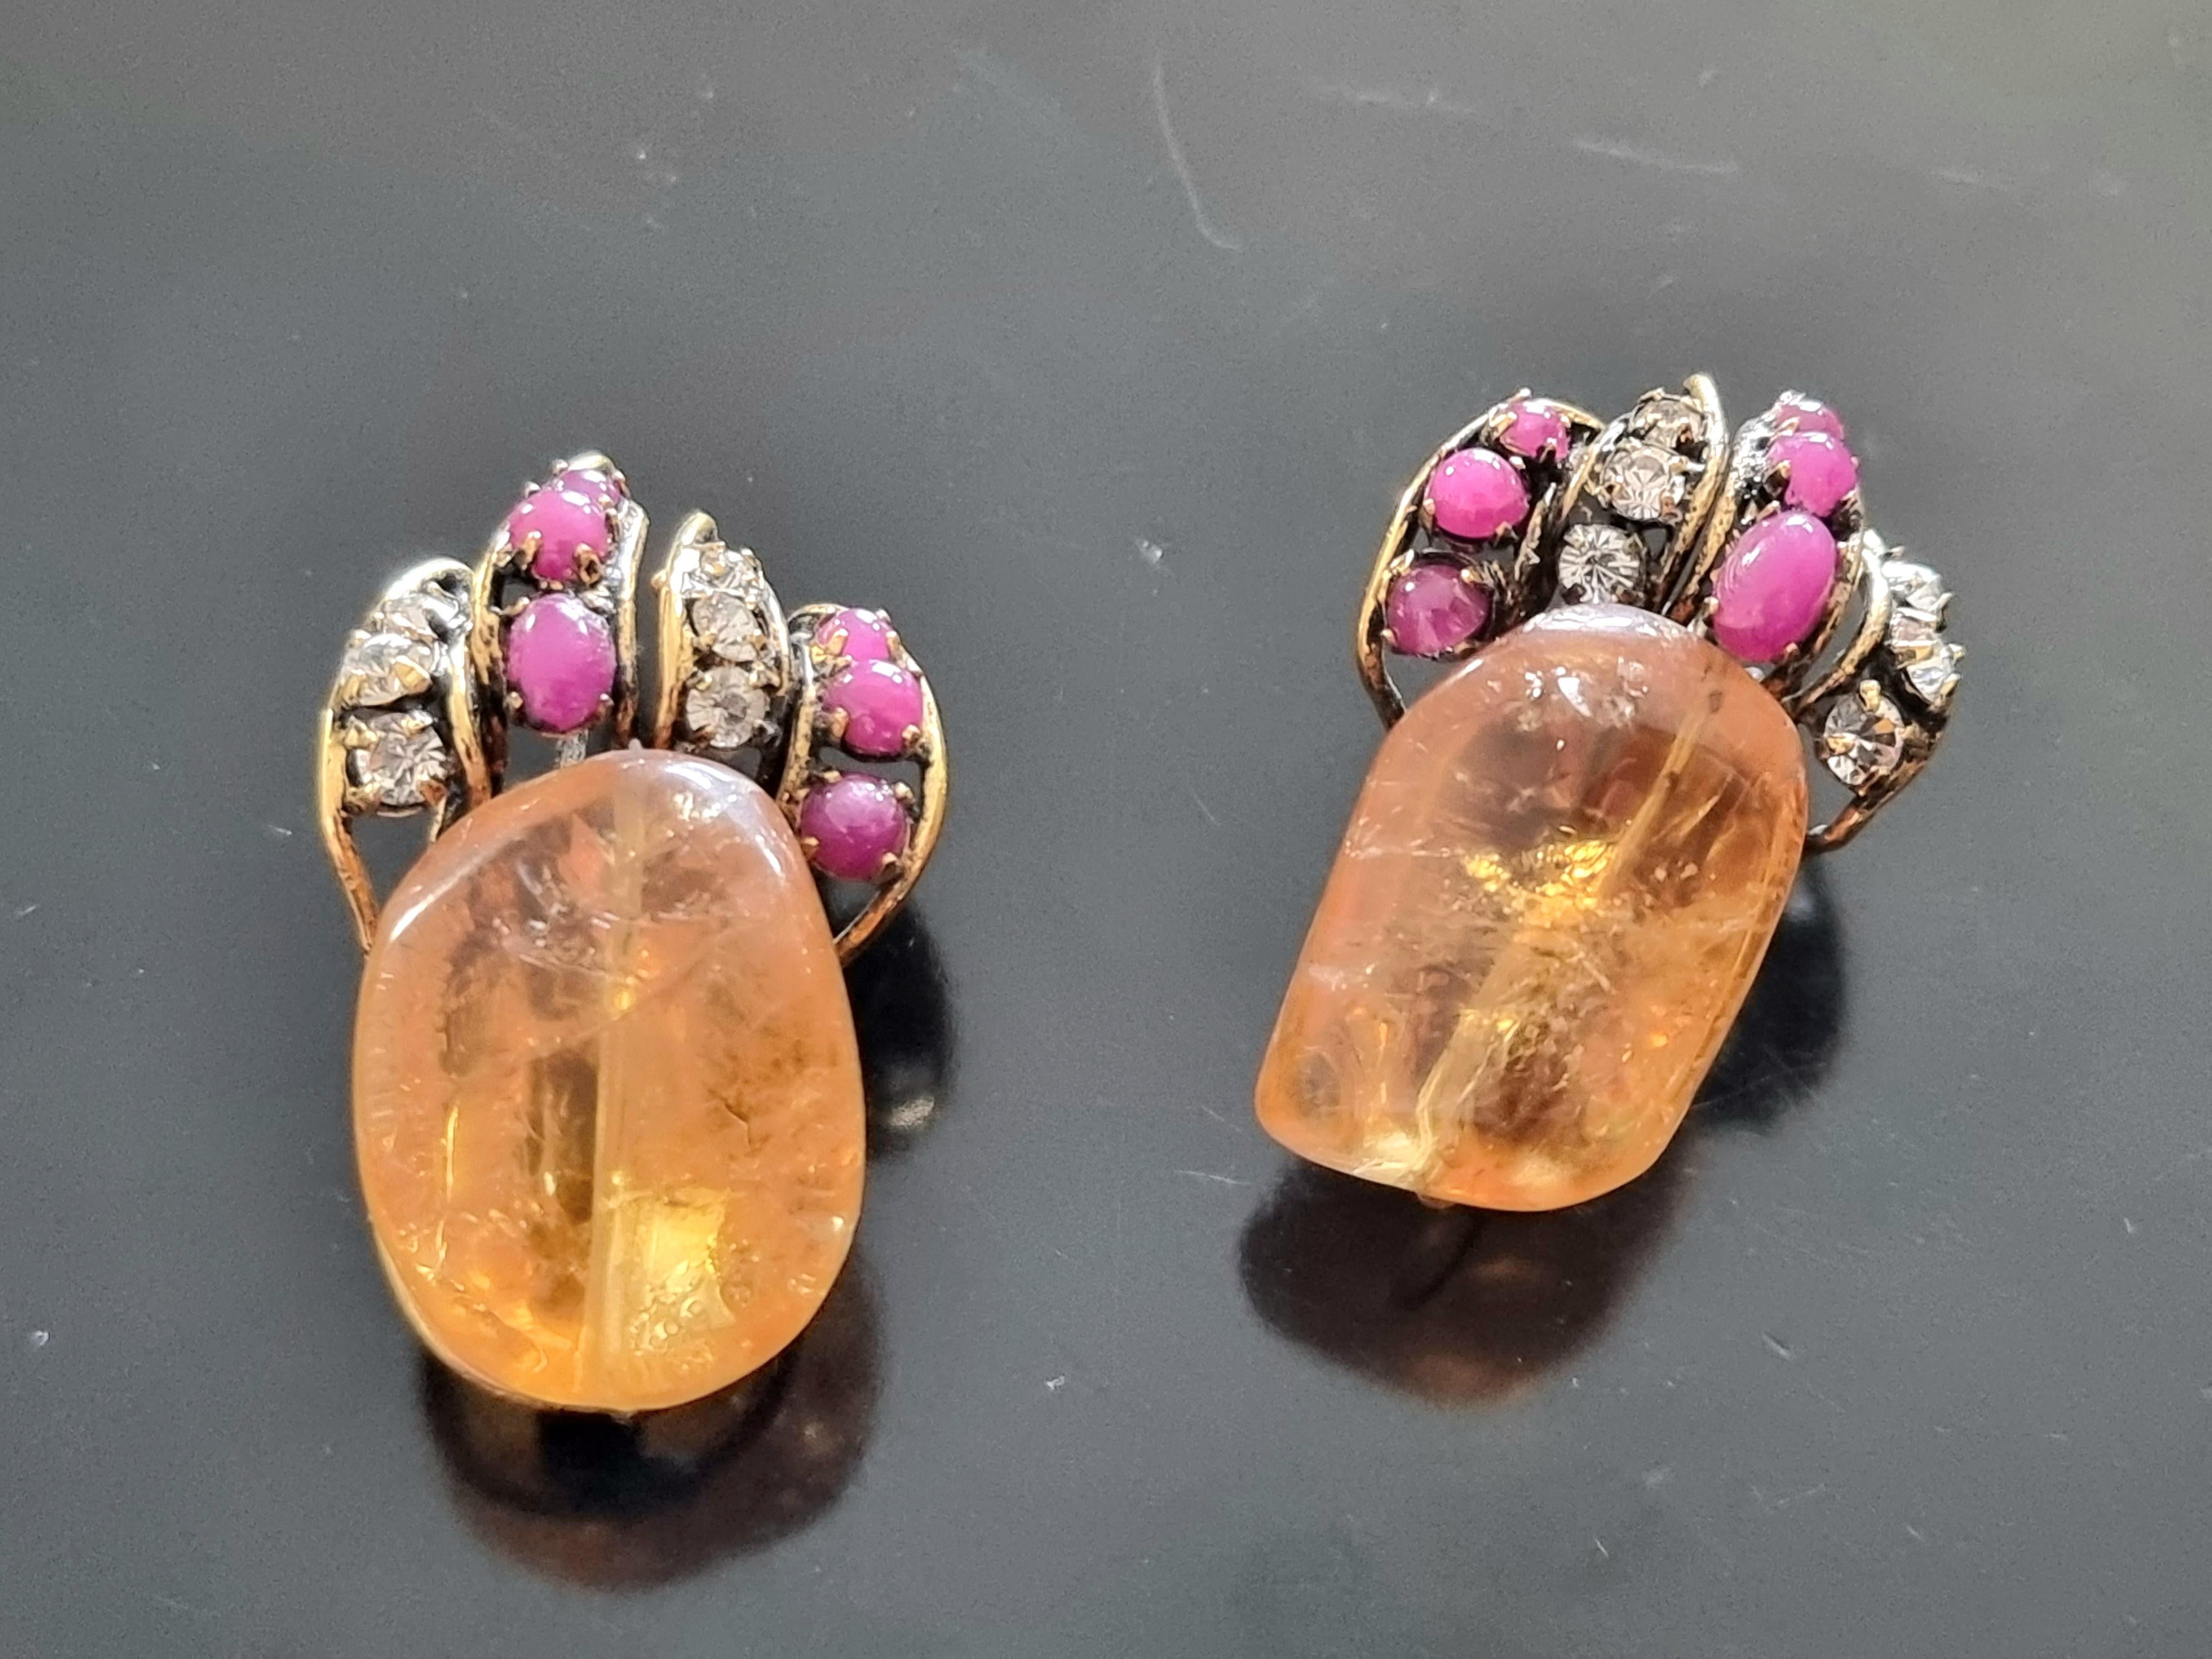 Magnificent Clip-on EARRINGS,
90s vintage,
golden metal, glass cabochons, rhinestones,
height 4,3 cm, width 2.3 cm, weight 1 x 13 g,
exceptional quality work,
good condition, some micro cracks on the orange stones.

Iradj Moini has been creating